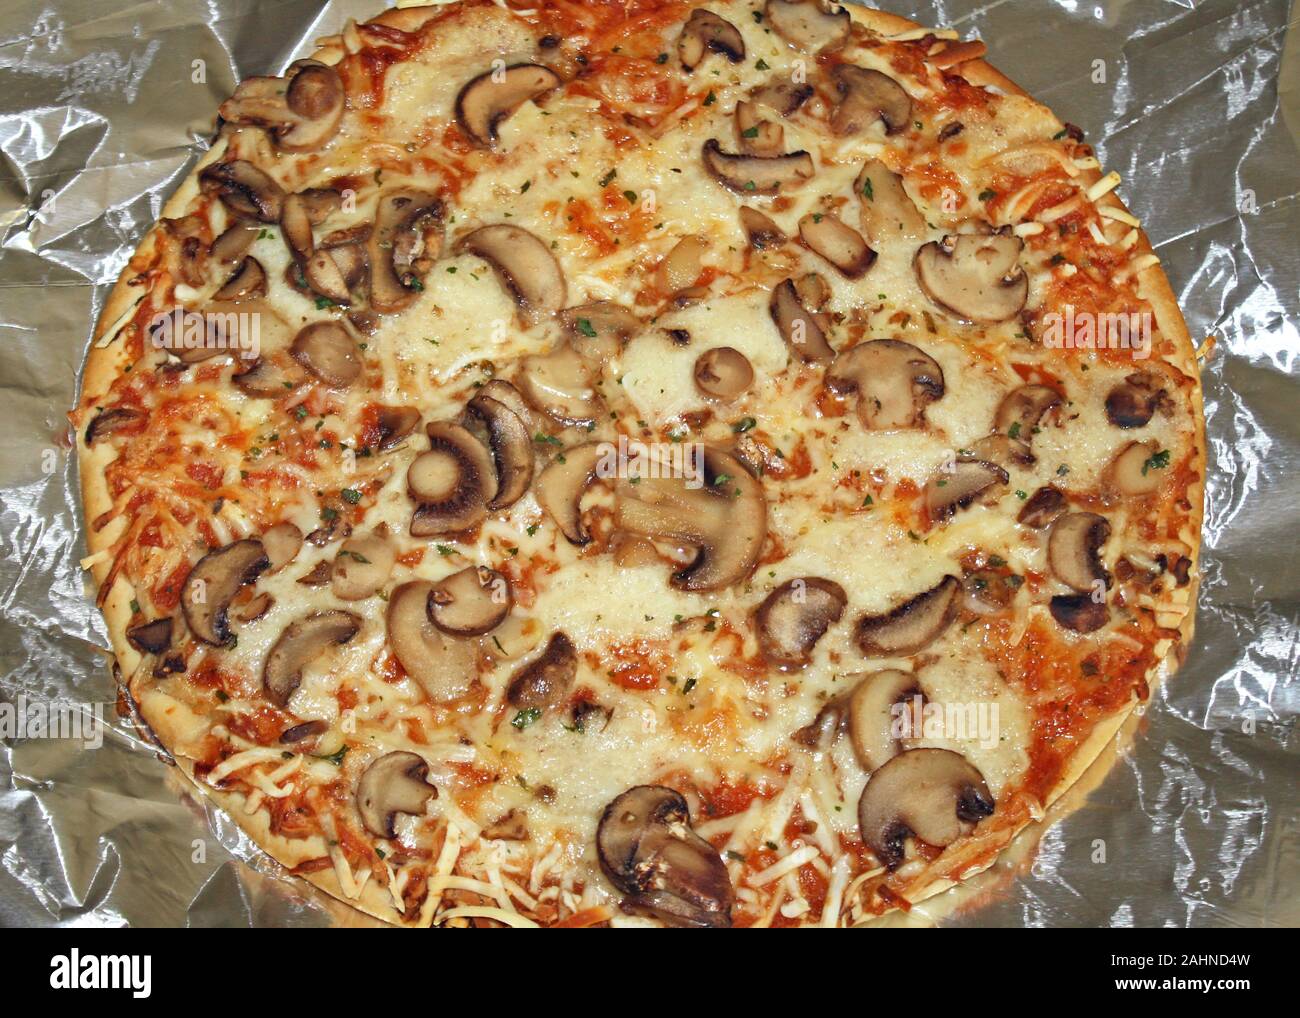 Mushroom and cheese pizza hot out of the oven Stock Photo